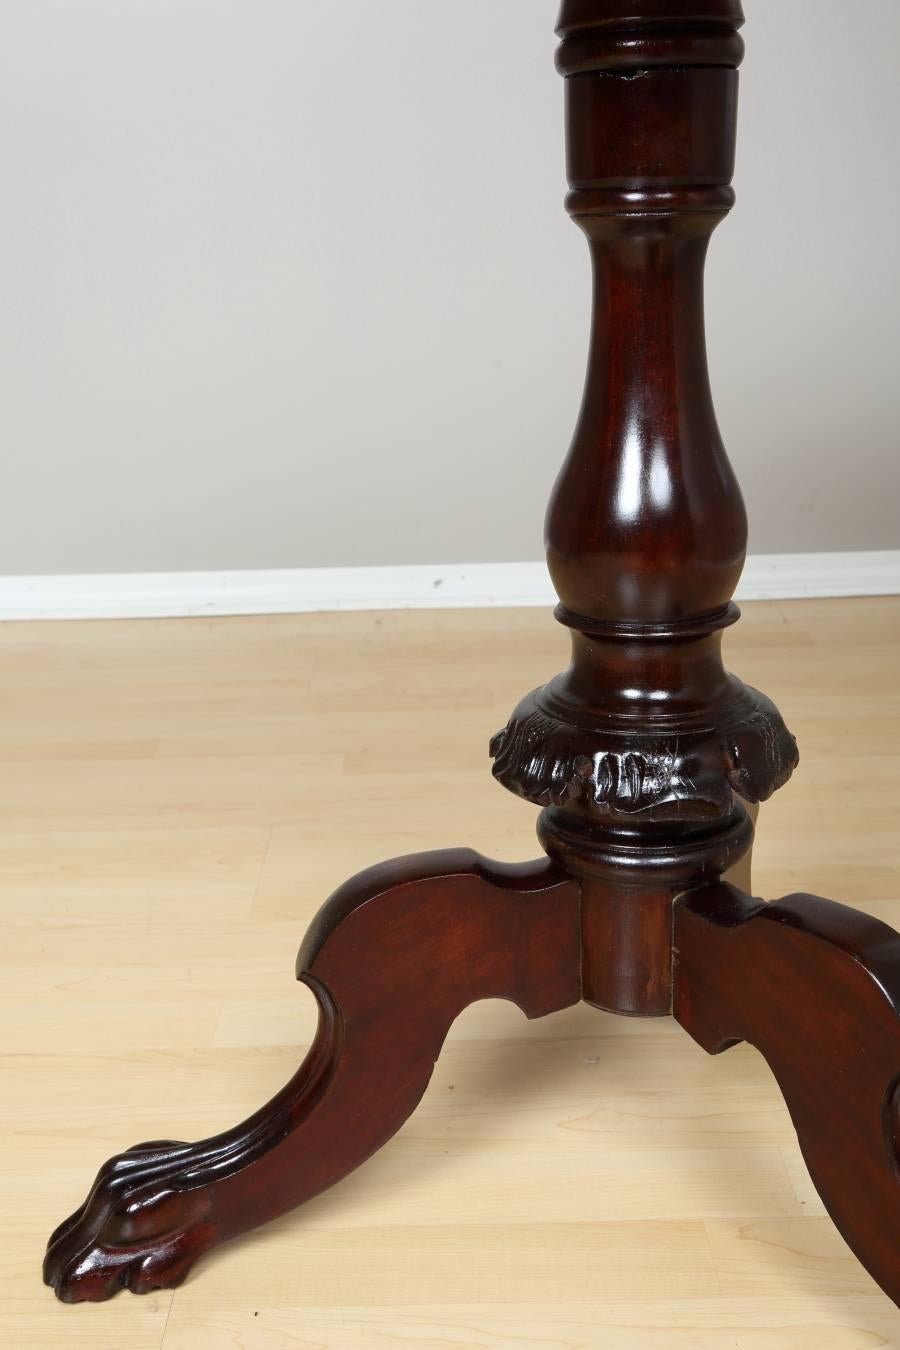 Biedermeier salon table, circa 1840. Elegant salon table from north Germany Biedermeier period. Mahogany veneer top is supported by rounded pedestal resting on lion feet - characteristic for Biedermeier period. The table has been professionally